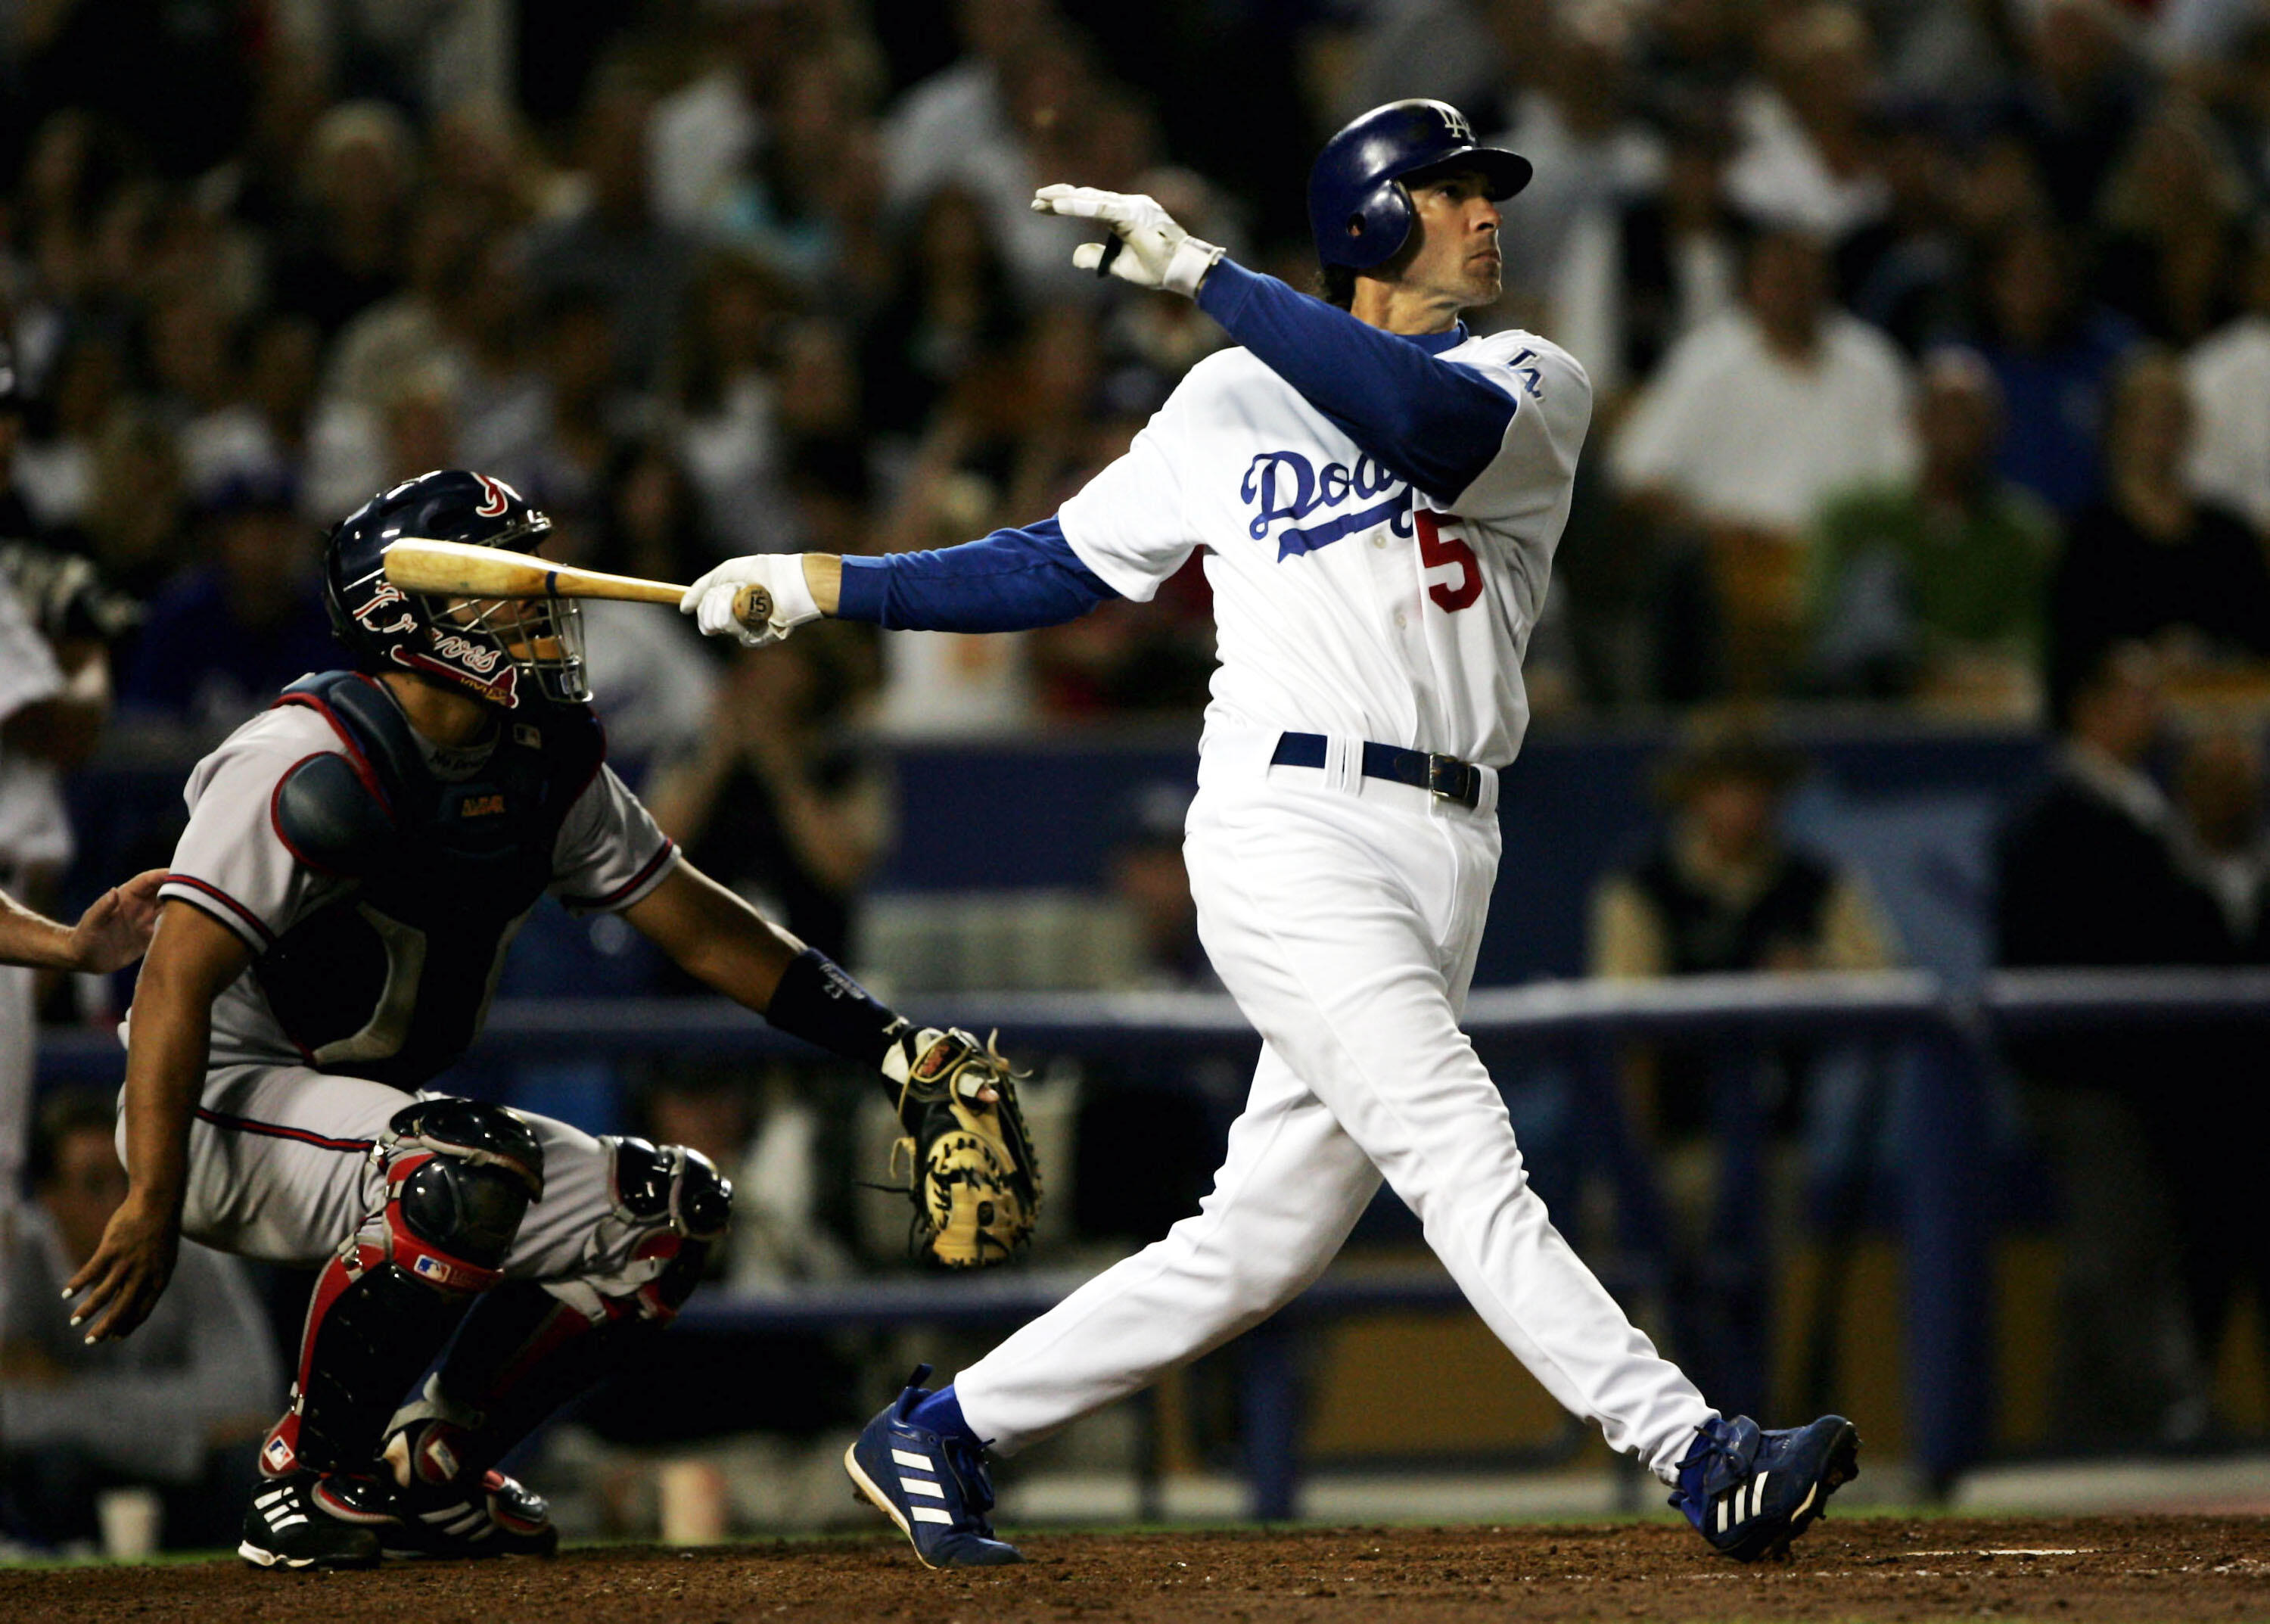 LOS ANGELES - AUGUST 19:  Shawn Green #15 of the Los Angeles Dodgers hits his second home run of the game and the second of back to back home runs with Adrian Beltre to tie the score at 5-5 with the Atlanta Braves in the eighth inning on August 19, 2004 a